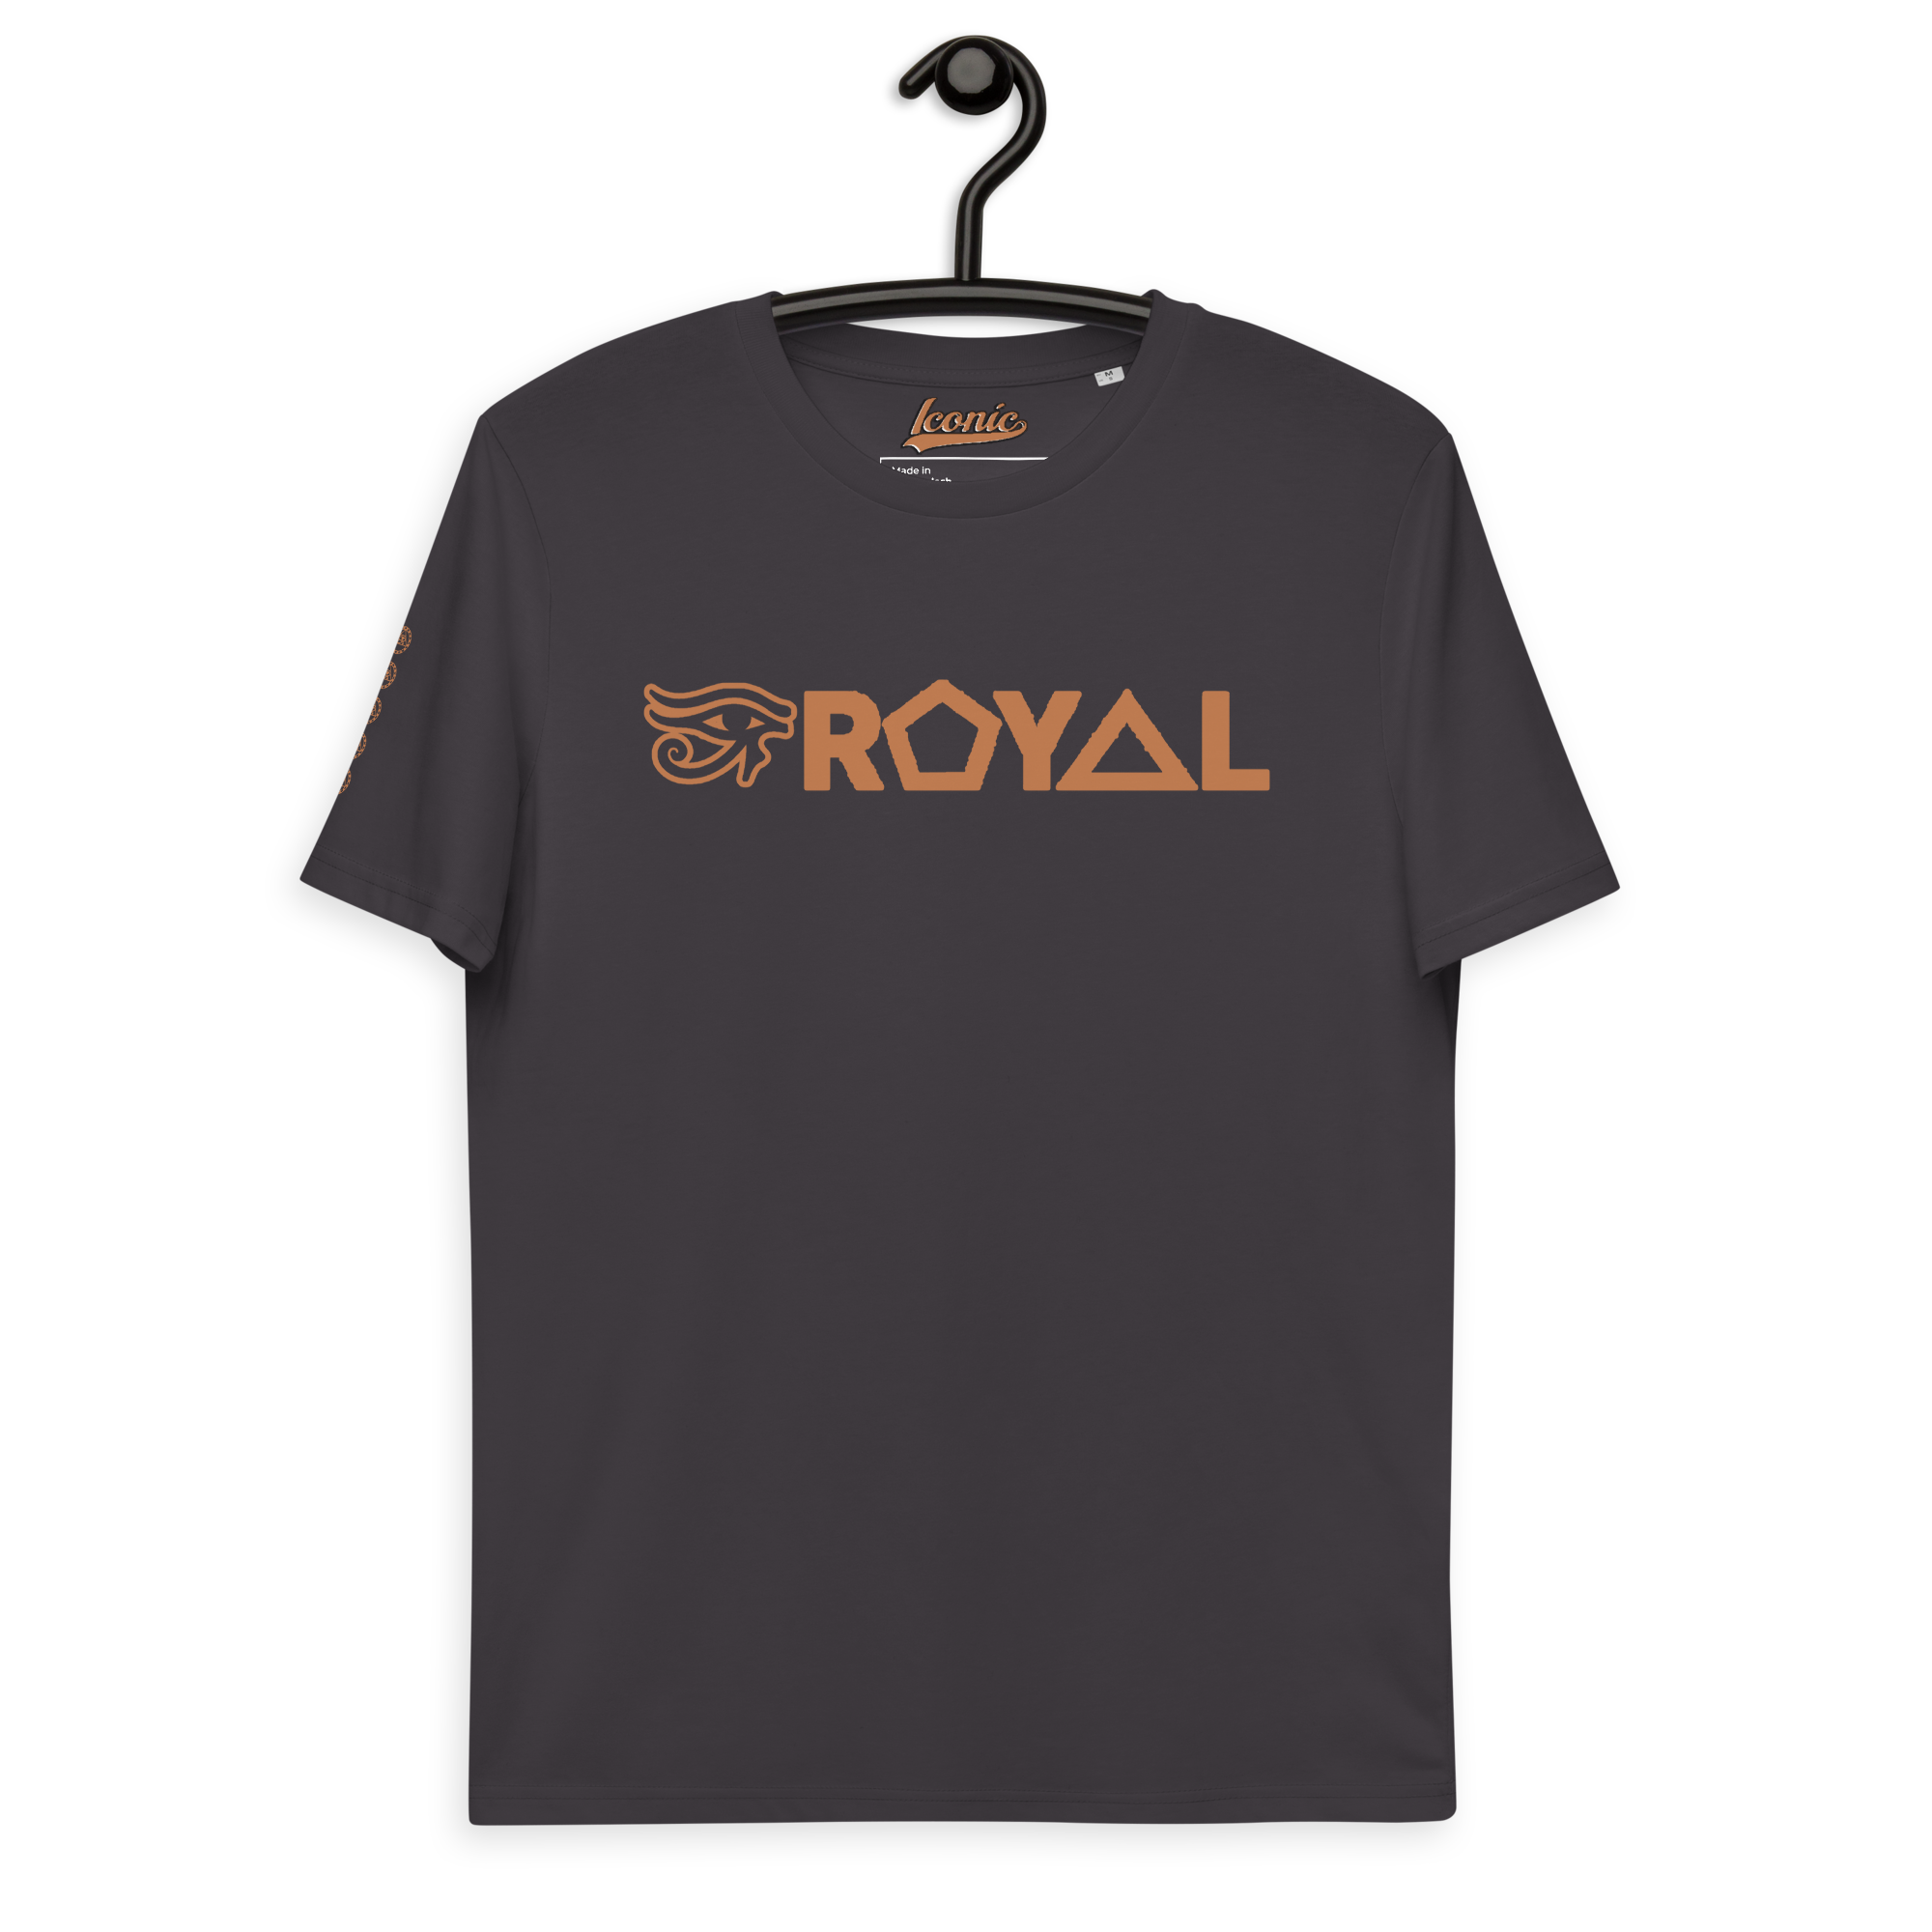 Royal ICONIC. Grand Rising Unisex organic cotton tee COLOR VARIETIES